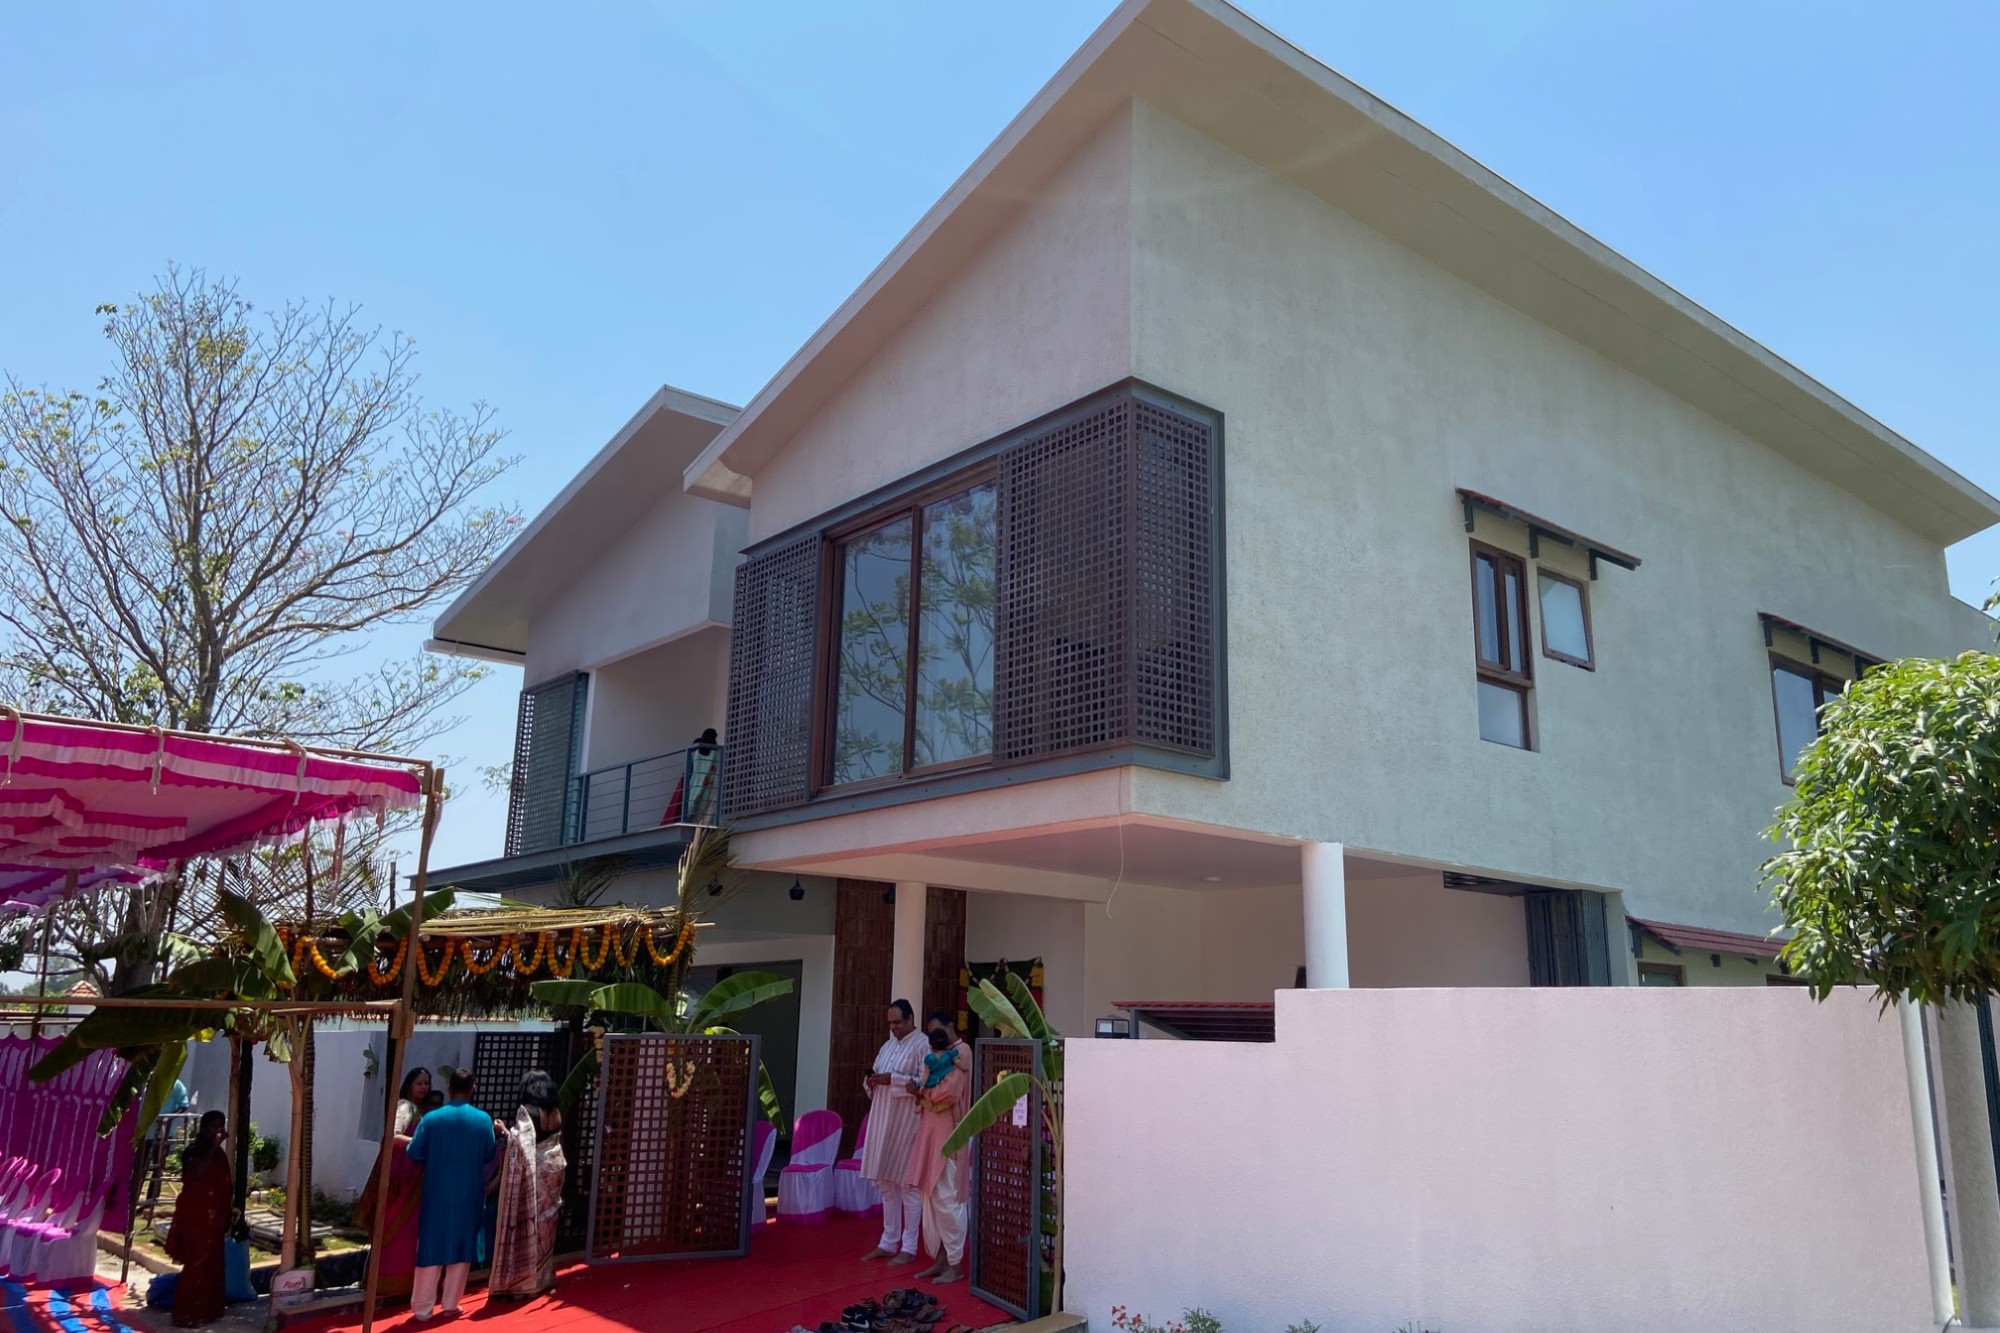 IndiHome123 transforms home construction in India